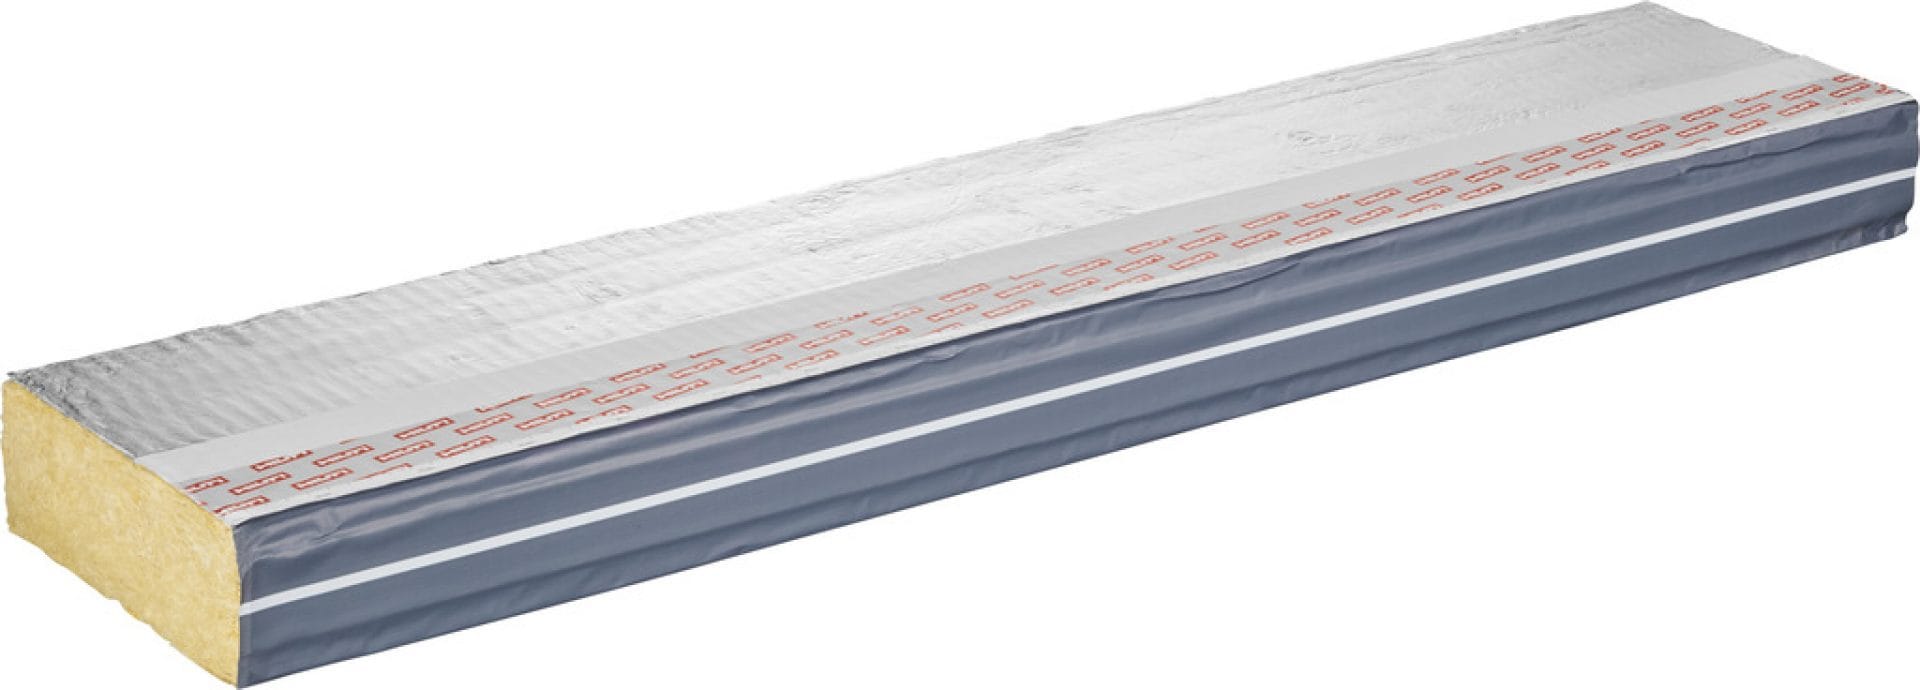 CP 674 V FIRE CAVITY BARRIER (VENTILATED)